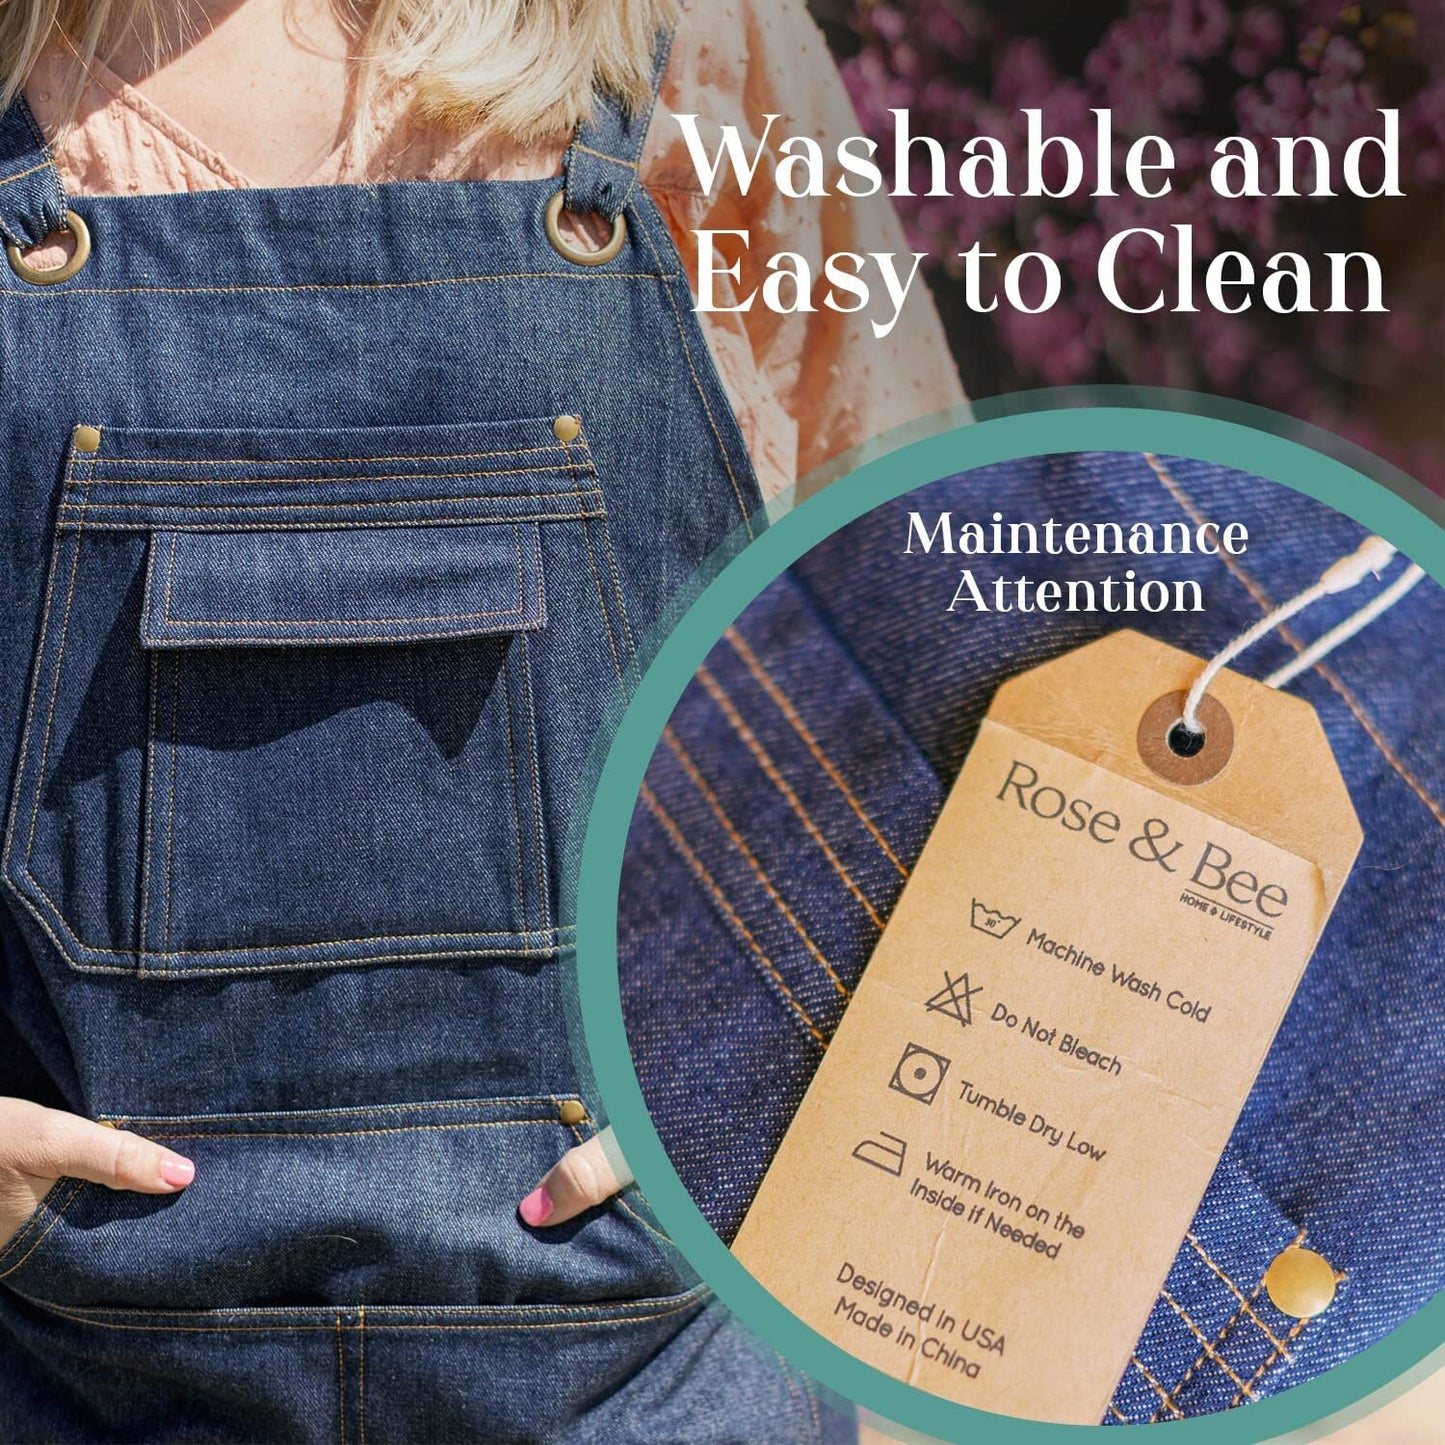 One Size Denim Apron for Men & Women, Hairstylist Apron, Apron for Crafting, Woodworking Apron with pockets, Gardening Apron, Painting Smock